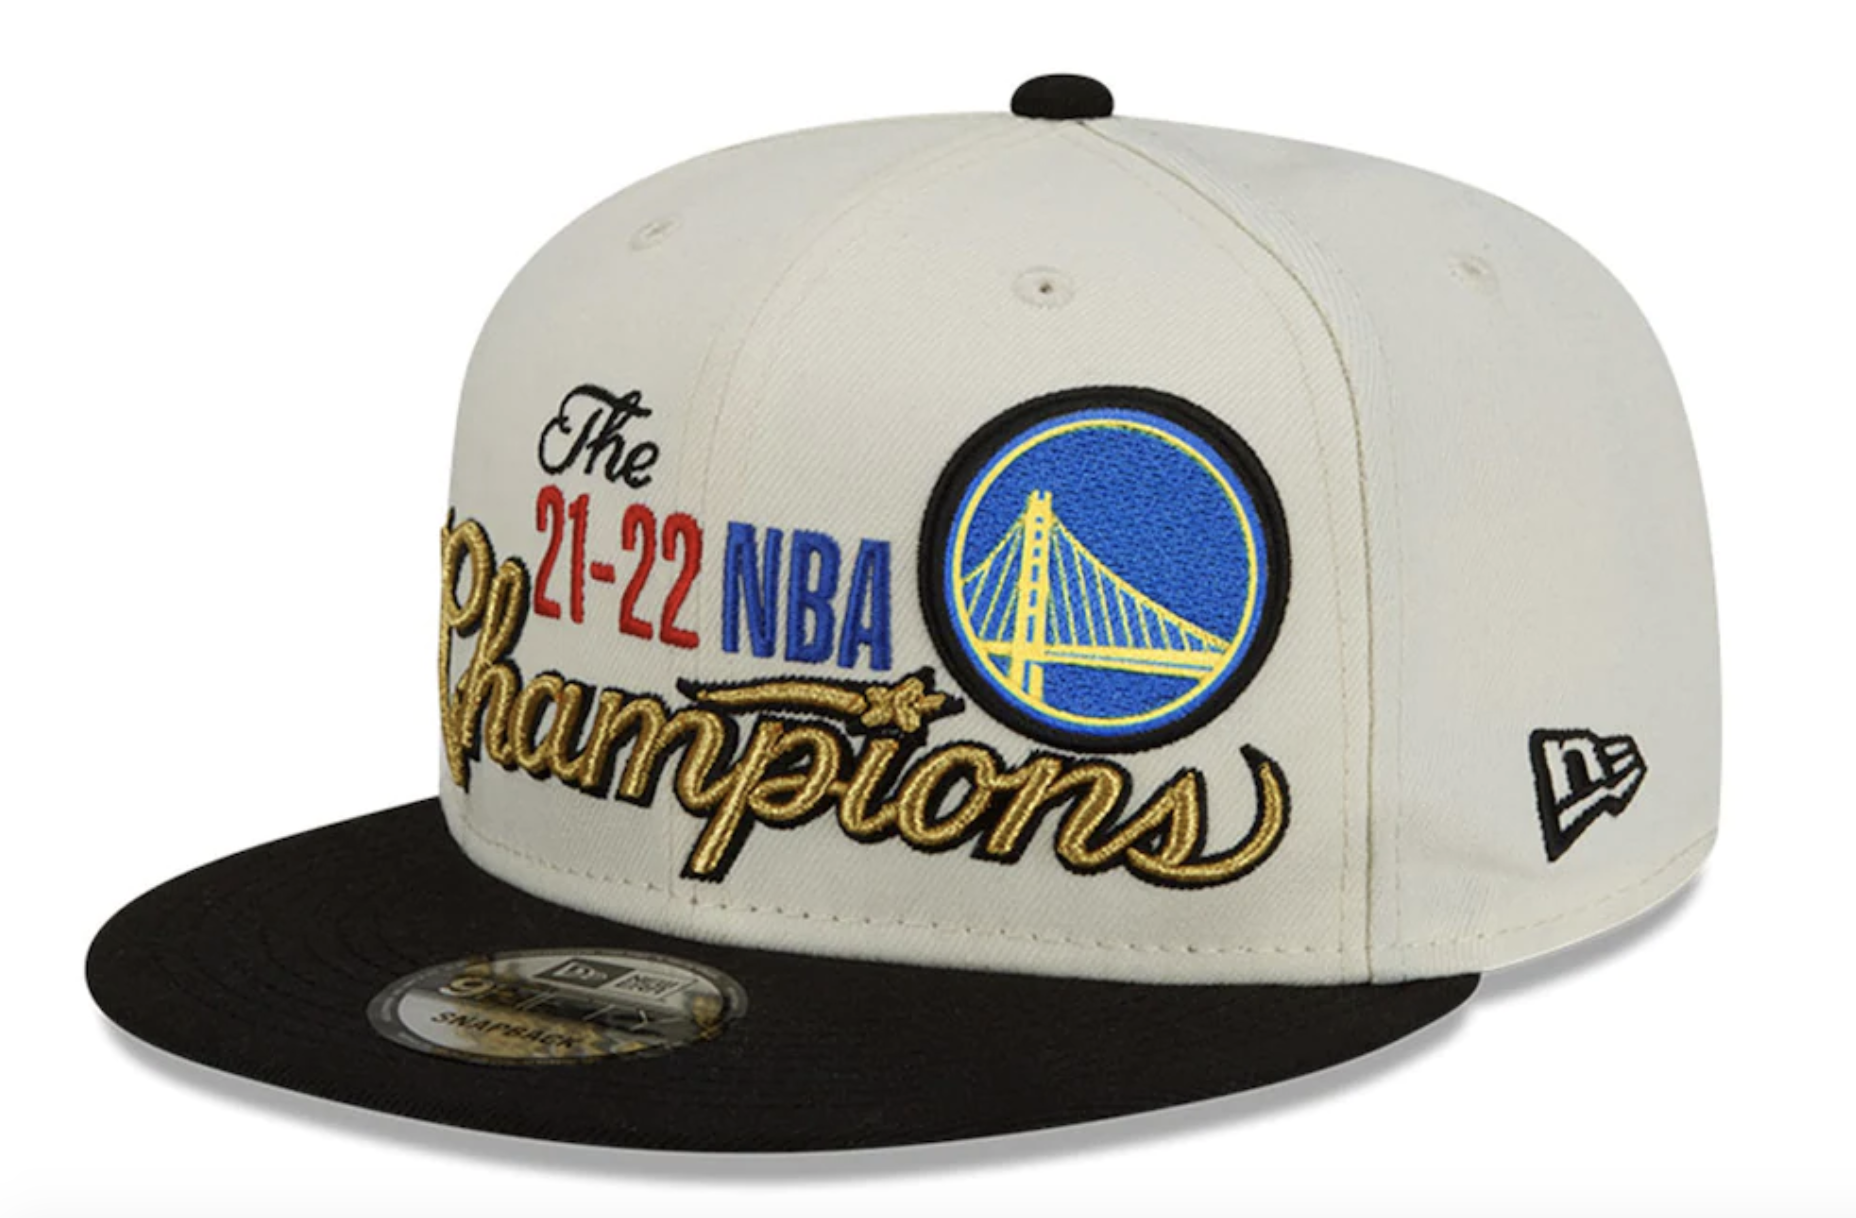 Hottest 2022 Golden State Warriors NBA championship gear includes